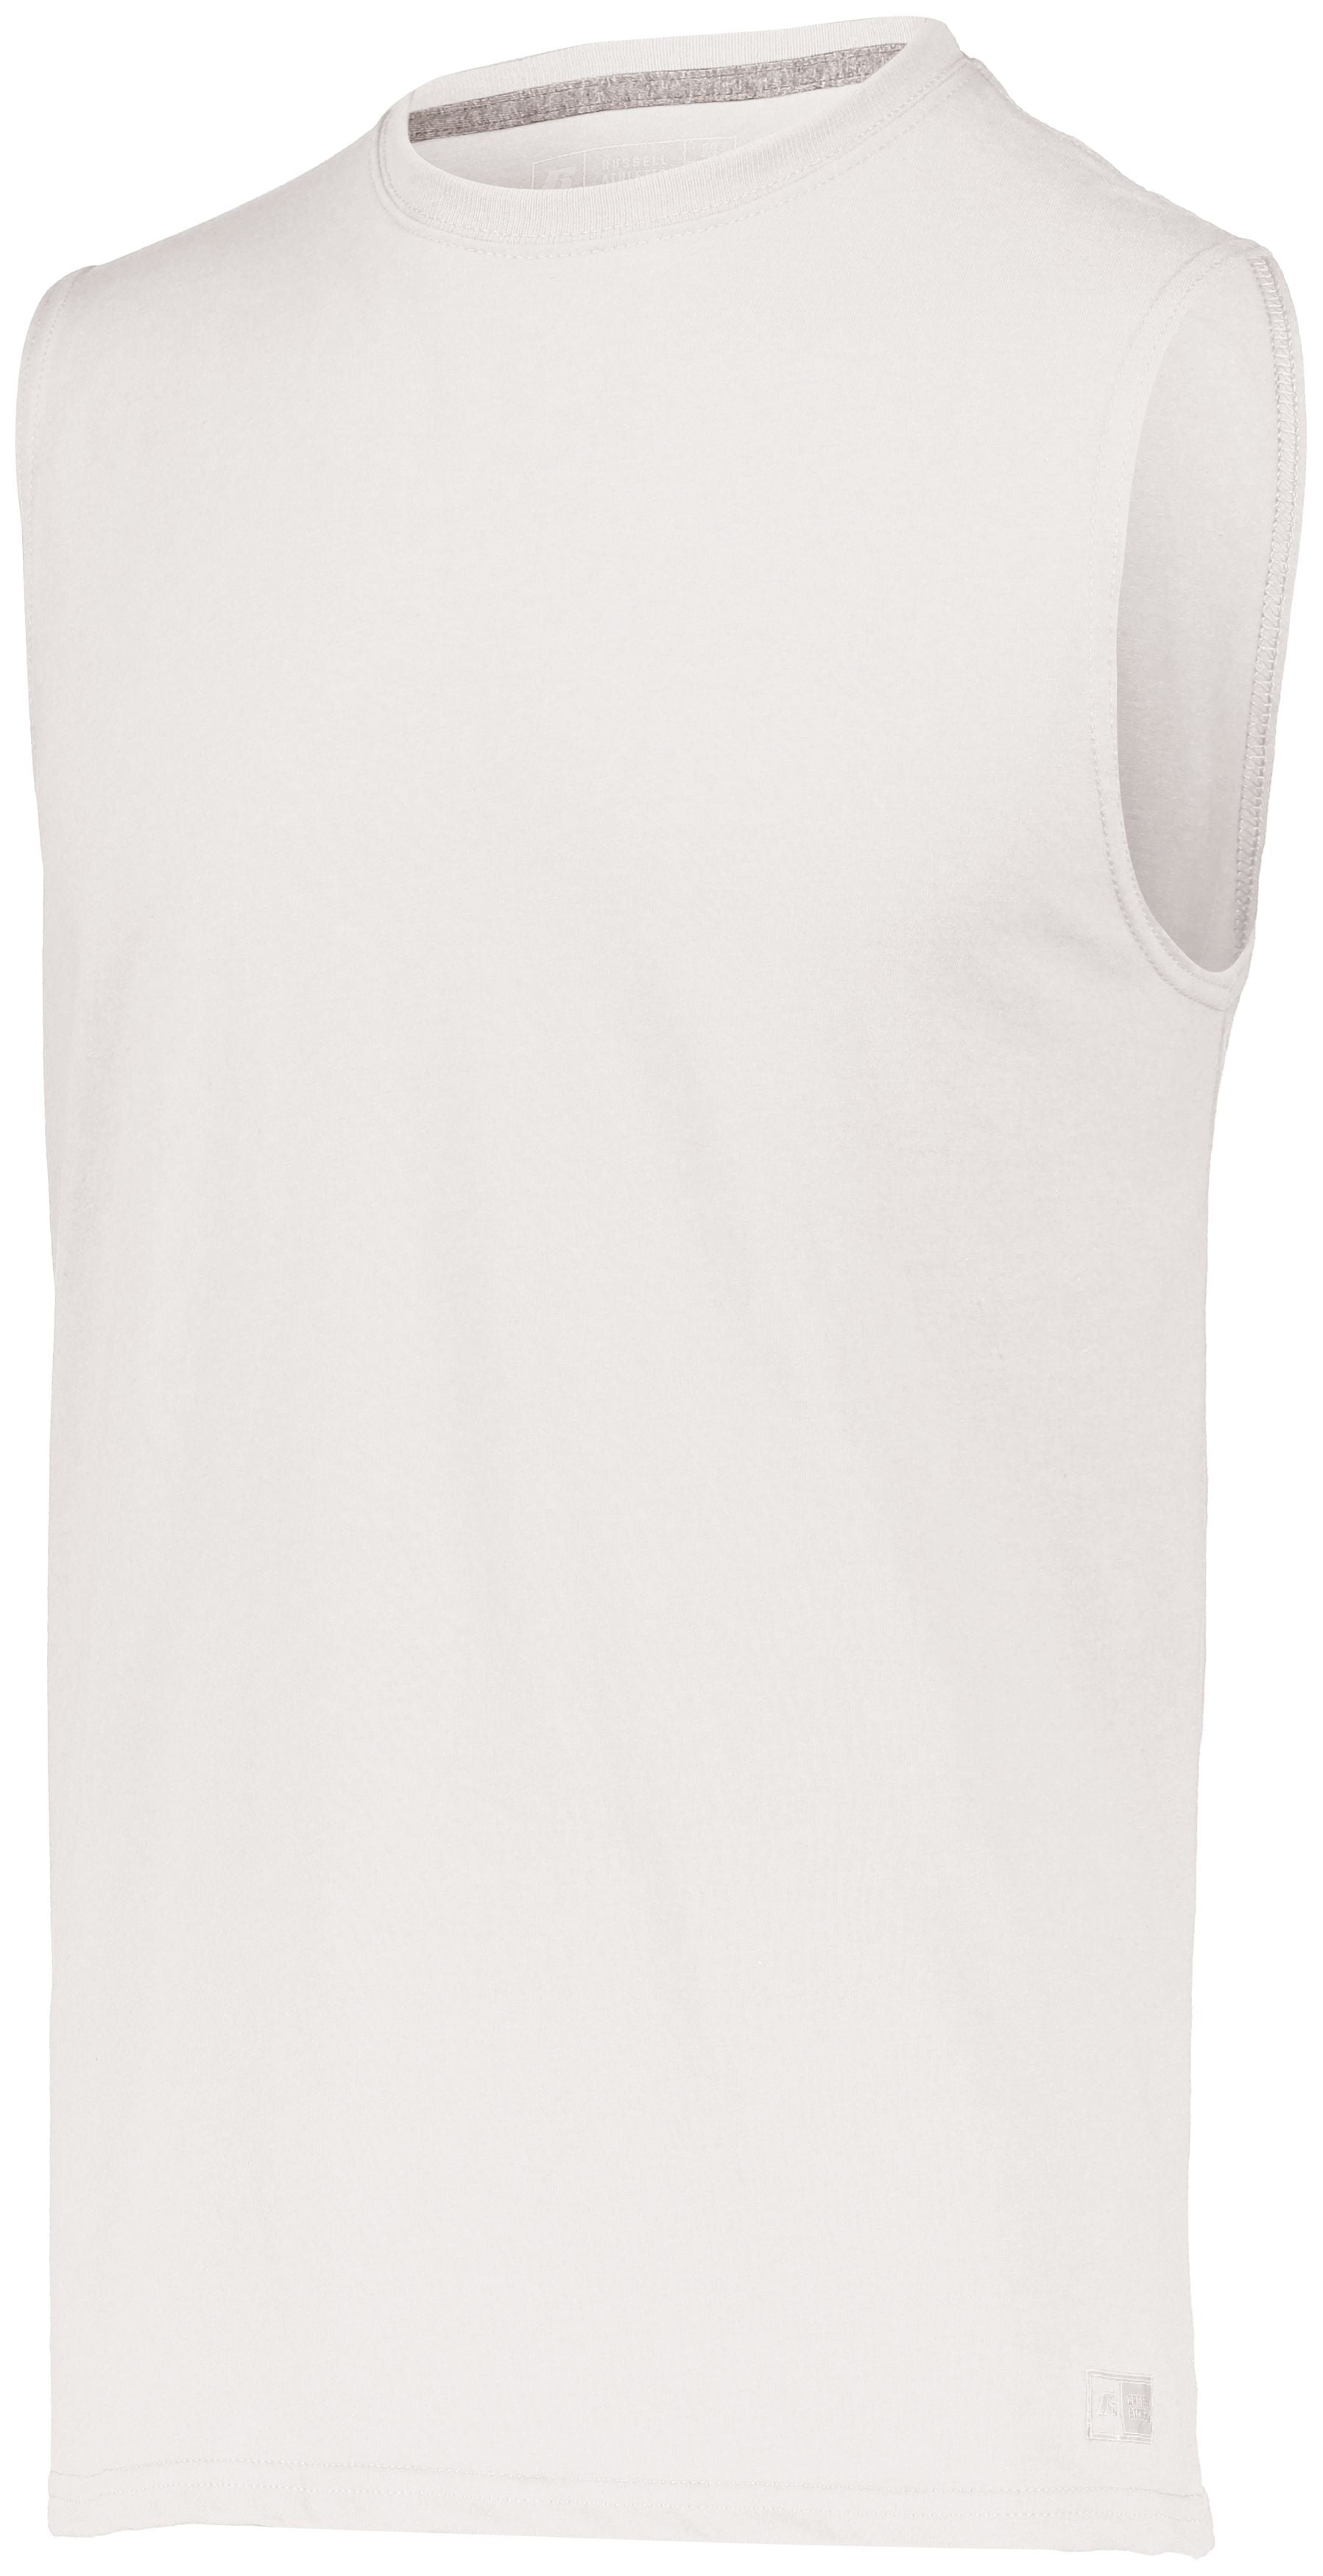 Russell Athletic Essential Muscle Tee in White  -Part of the Adult, Adult-Tee-Shirt, T-Shirts, Russell-Athletic-Products, Shirts product lines at KanaleyCreations.com